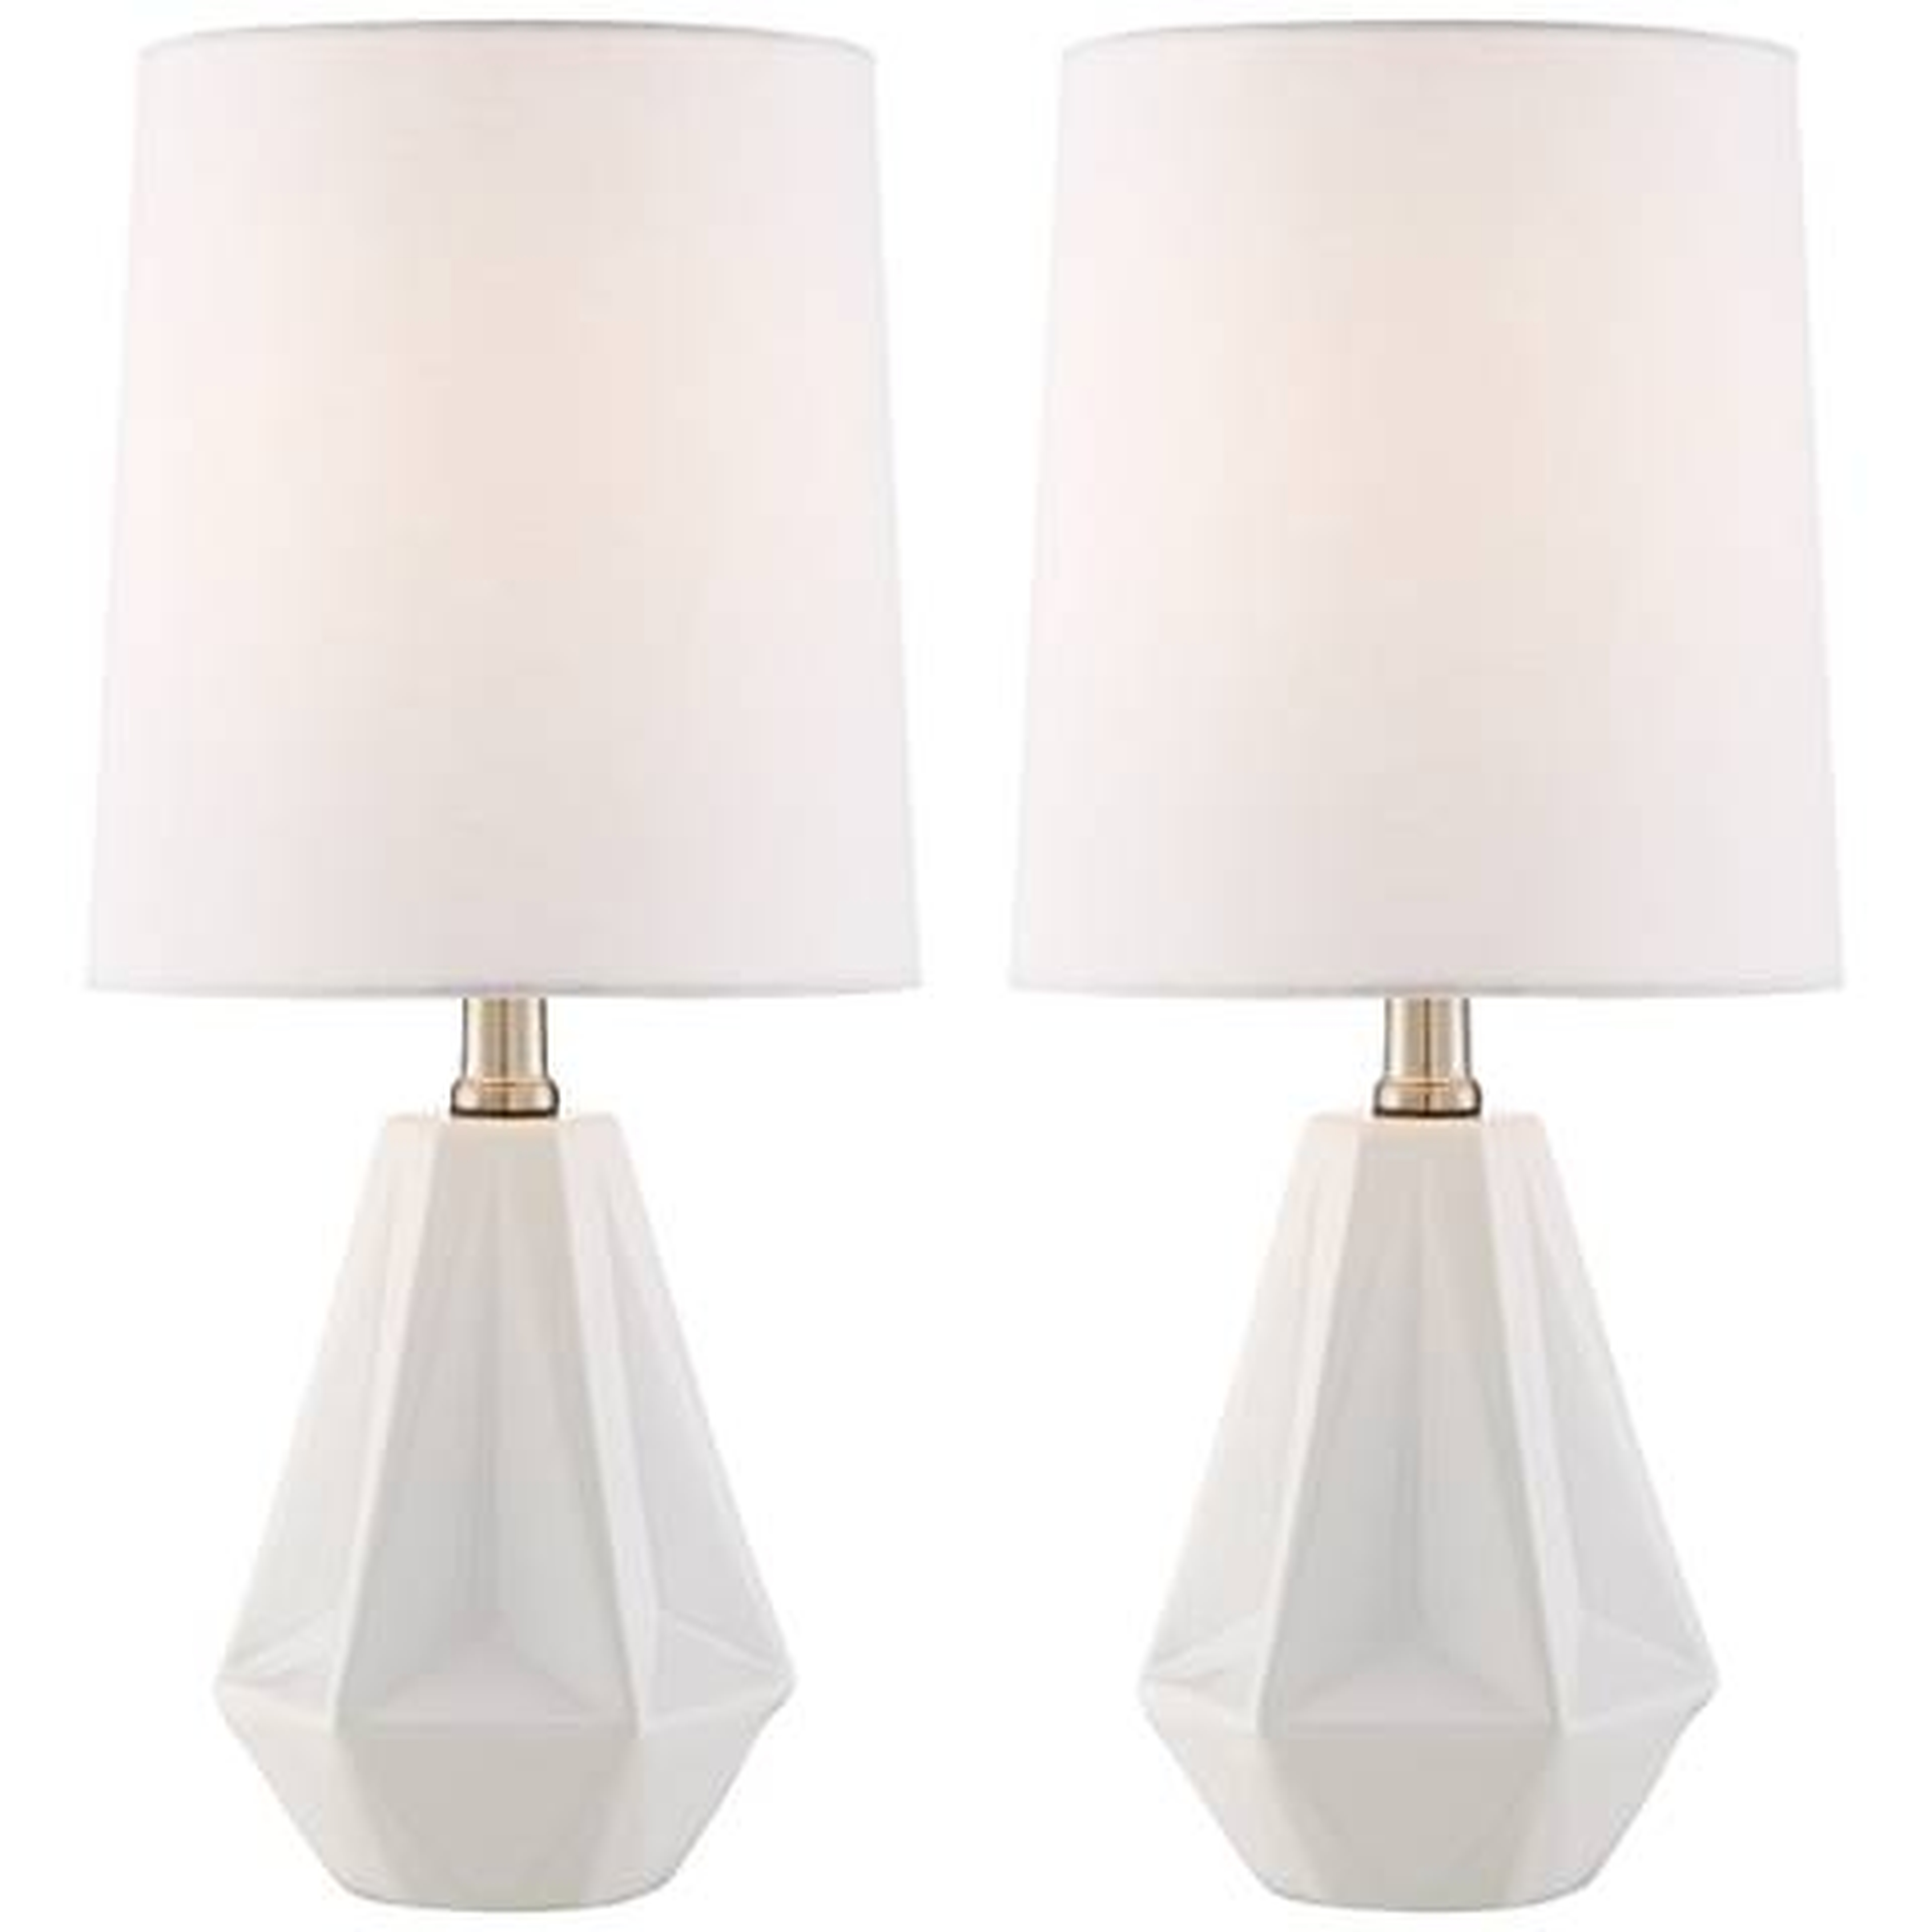 Colyn White Prism Accent Table Lamp Set of 2 - Lamps Plus